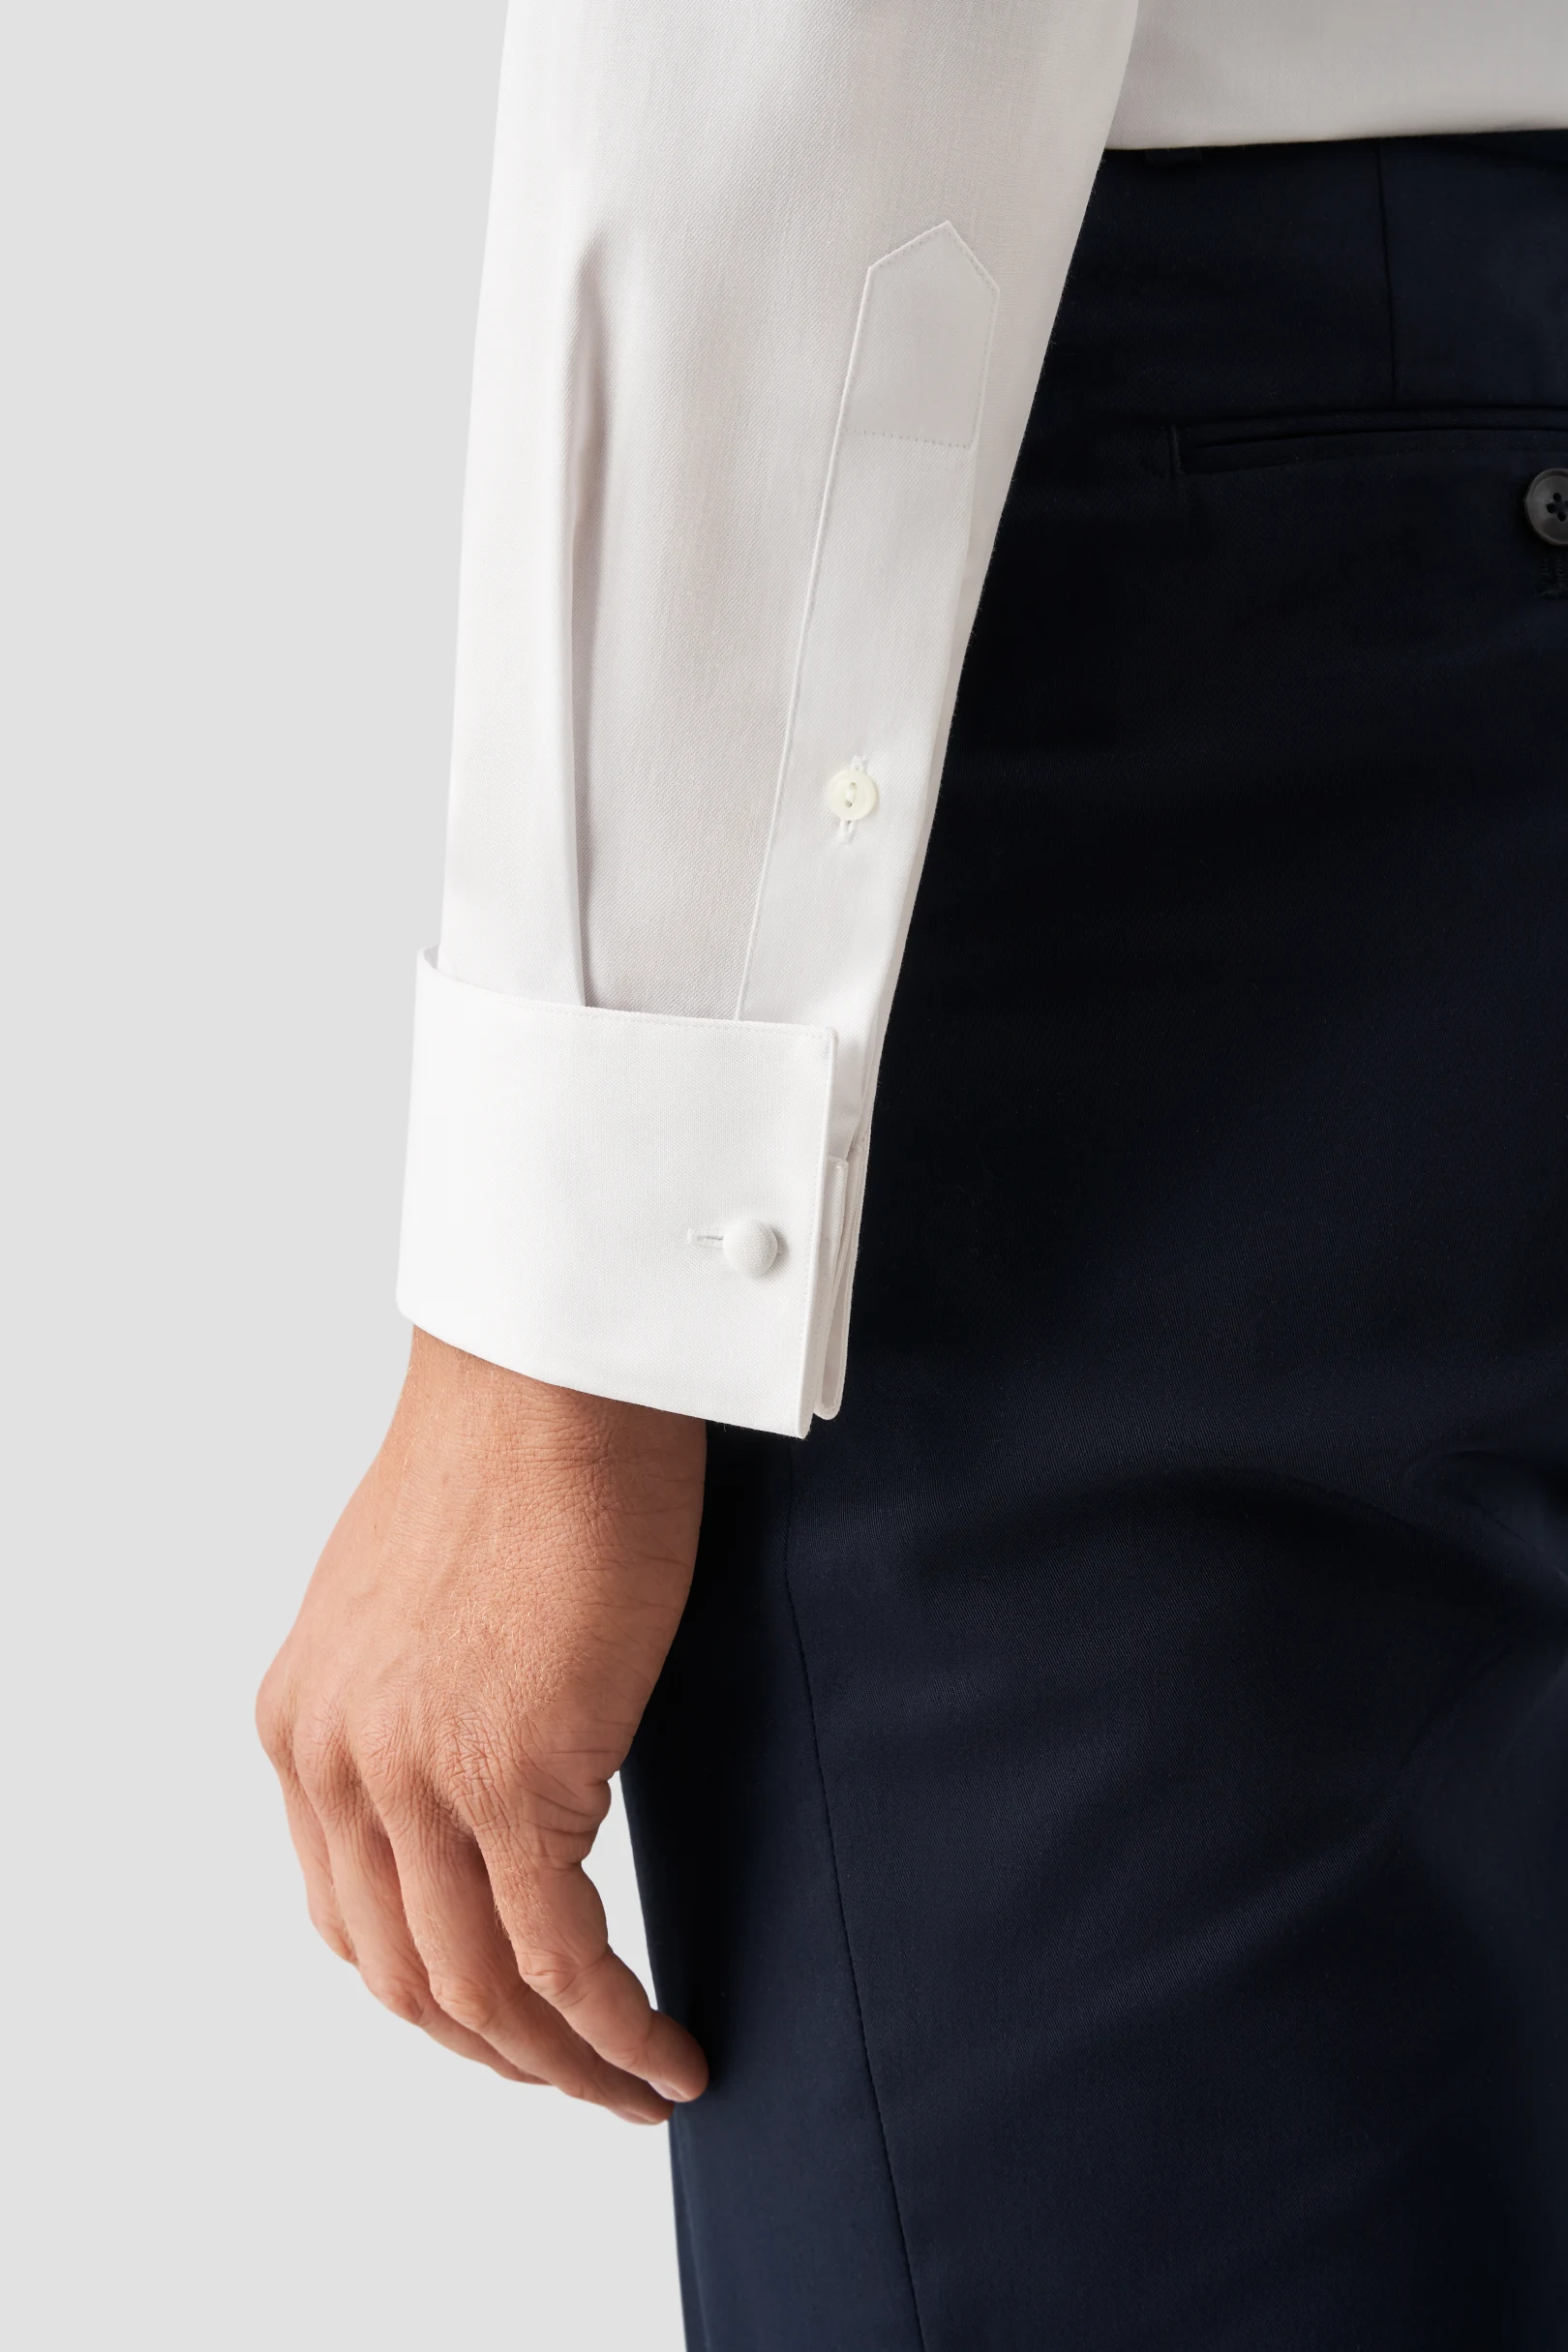 The Oxford shirt, between elegance and sophistication.